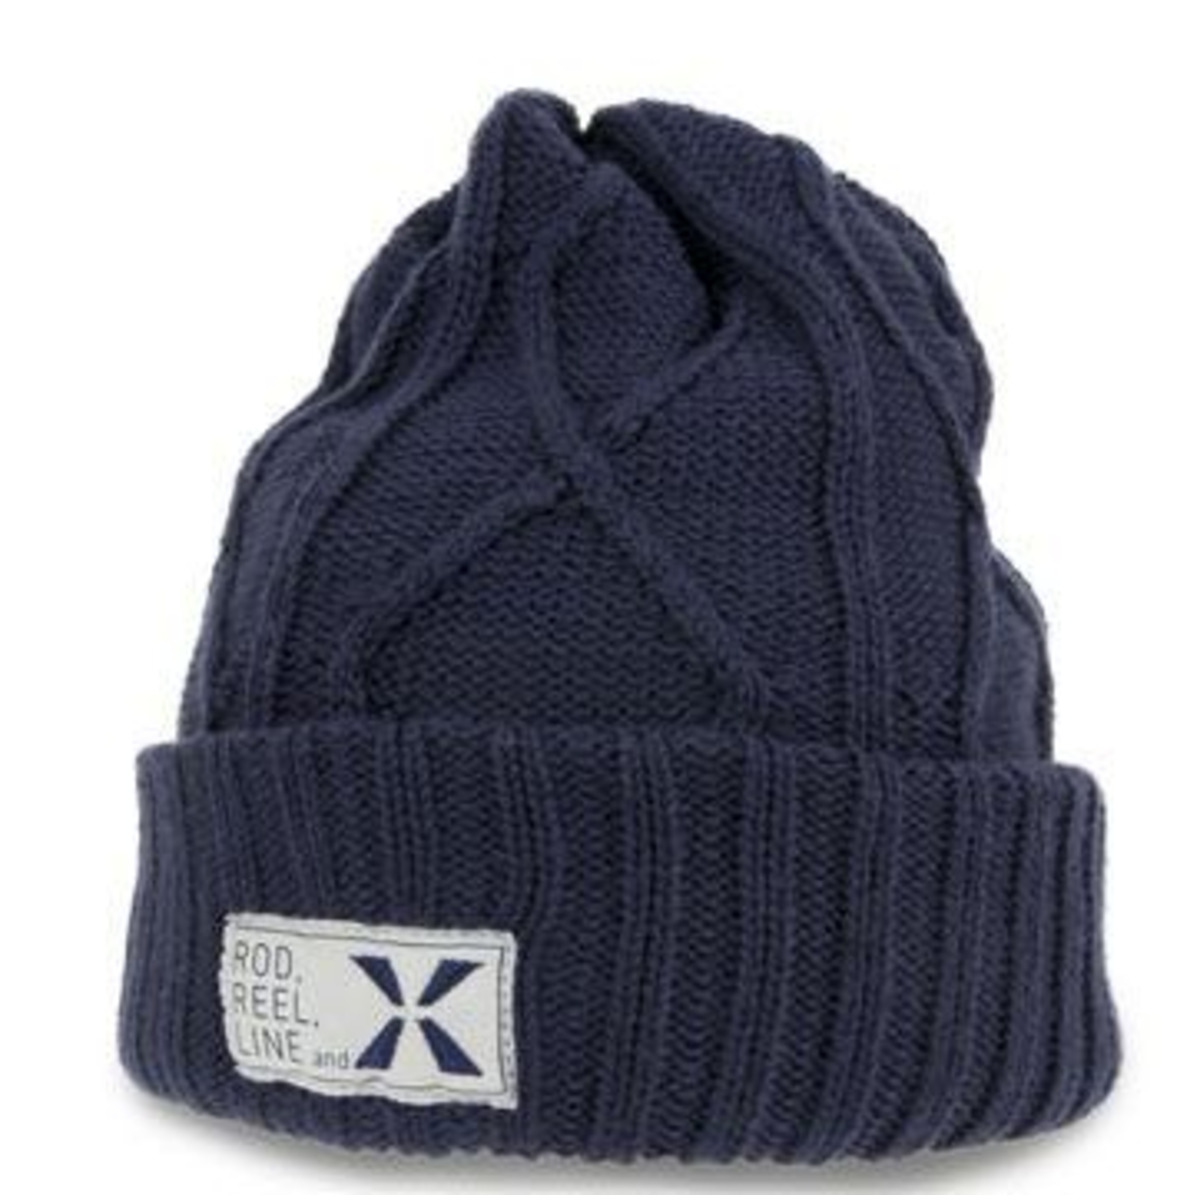 Shimano Casquette Cable Knit Xefo Megaheat - Navy